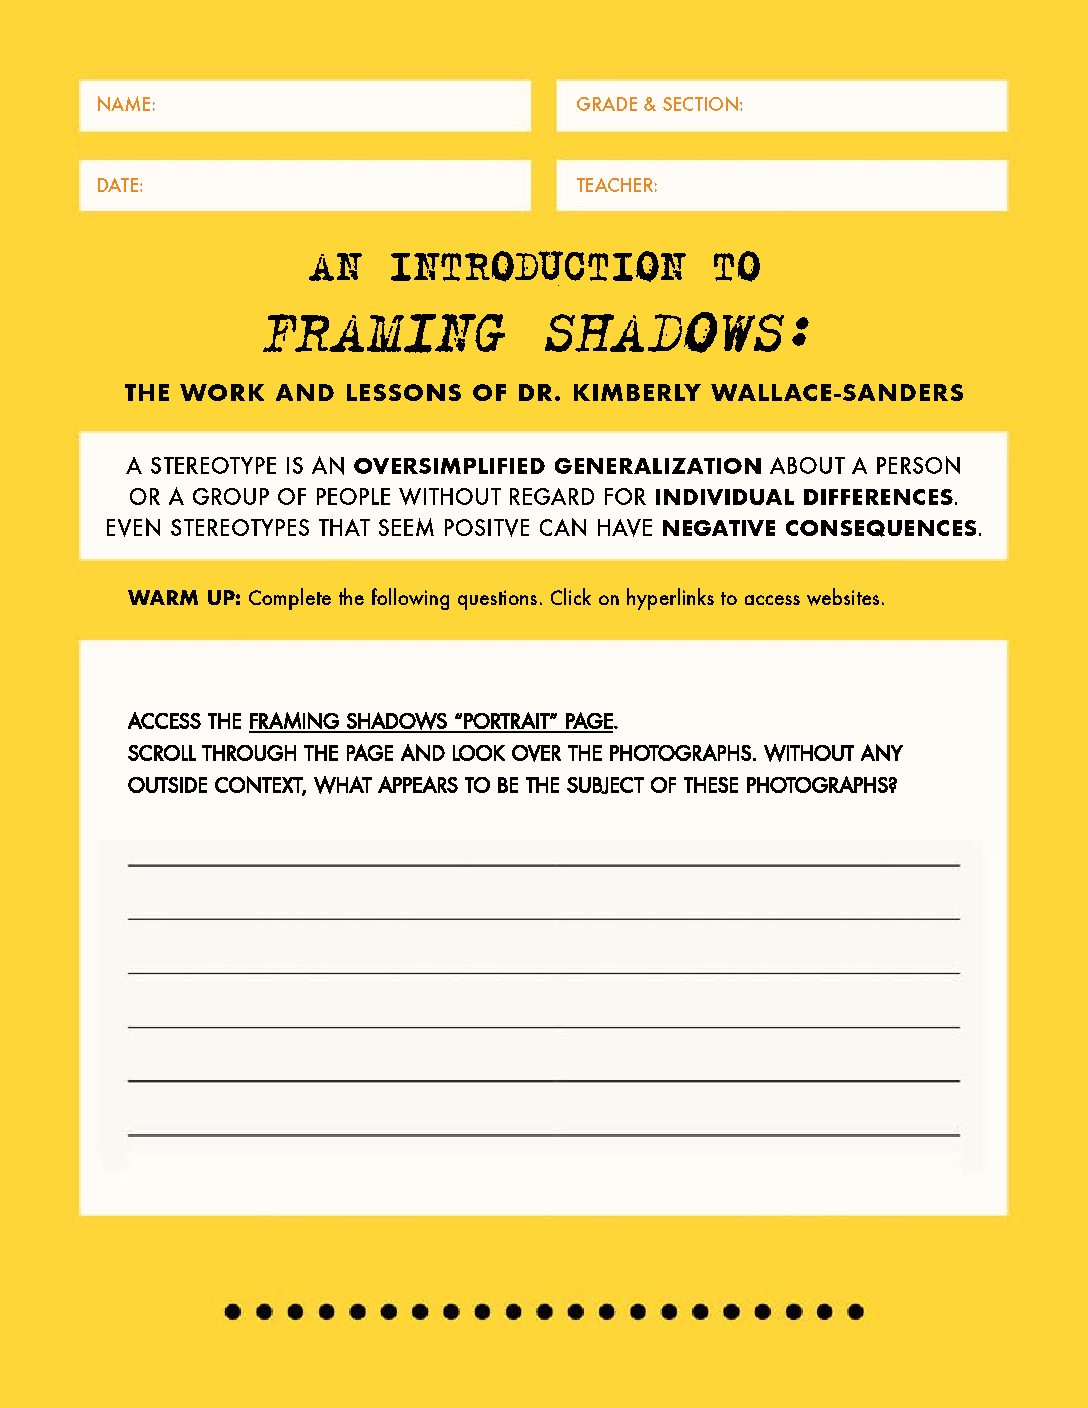 Yellow worksheet with black text and blank white areas for writing